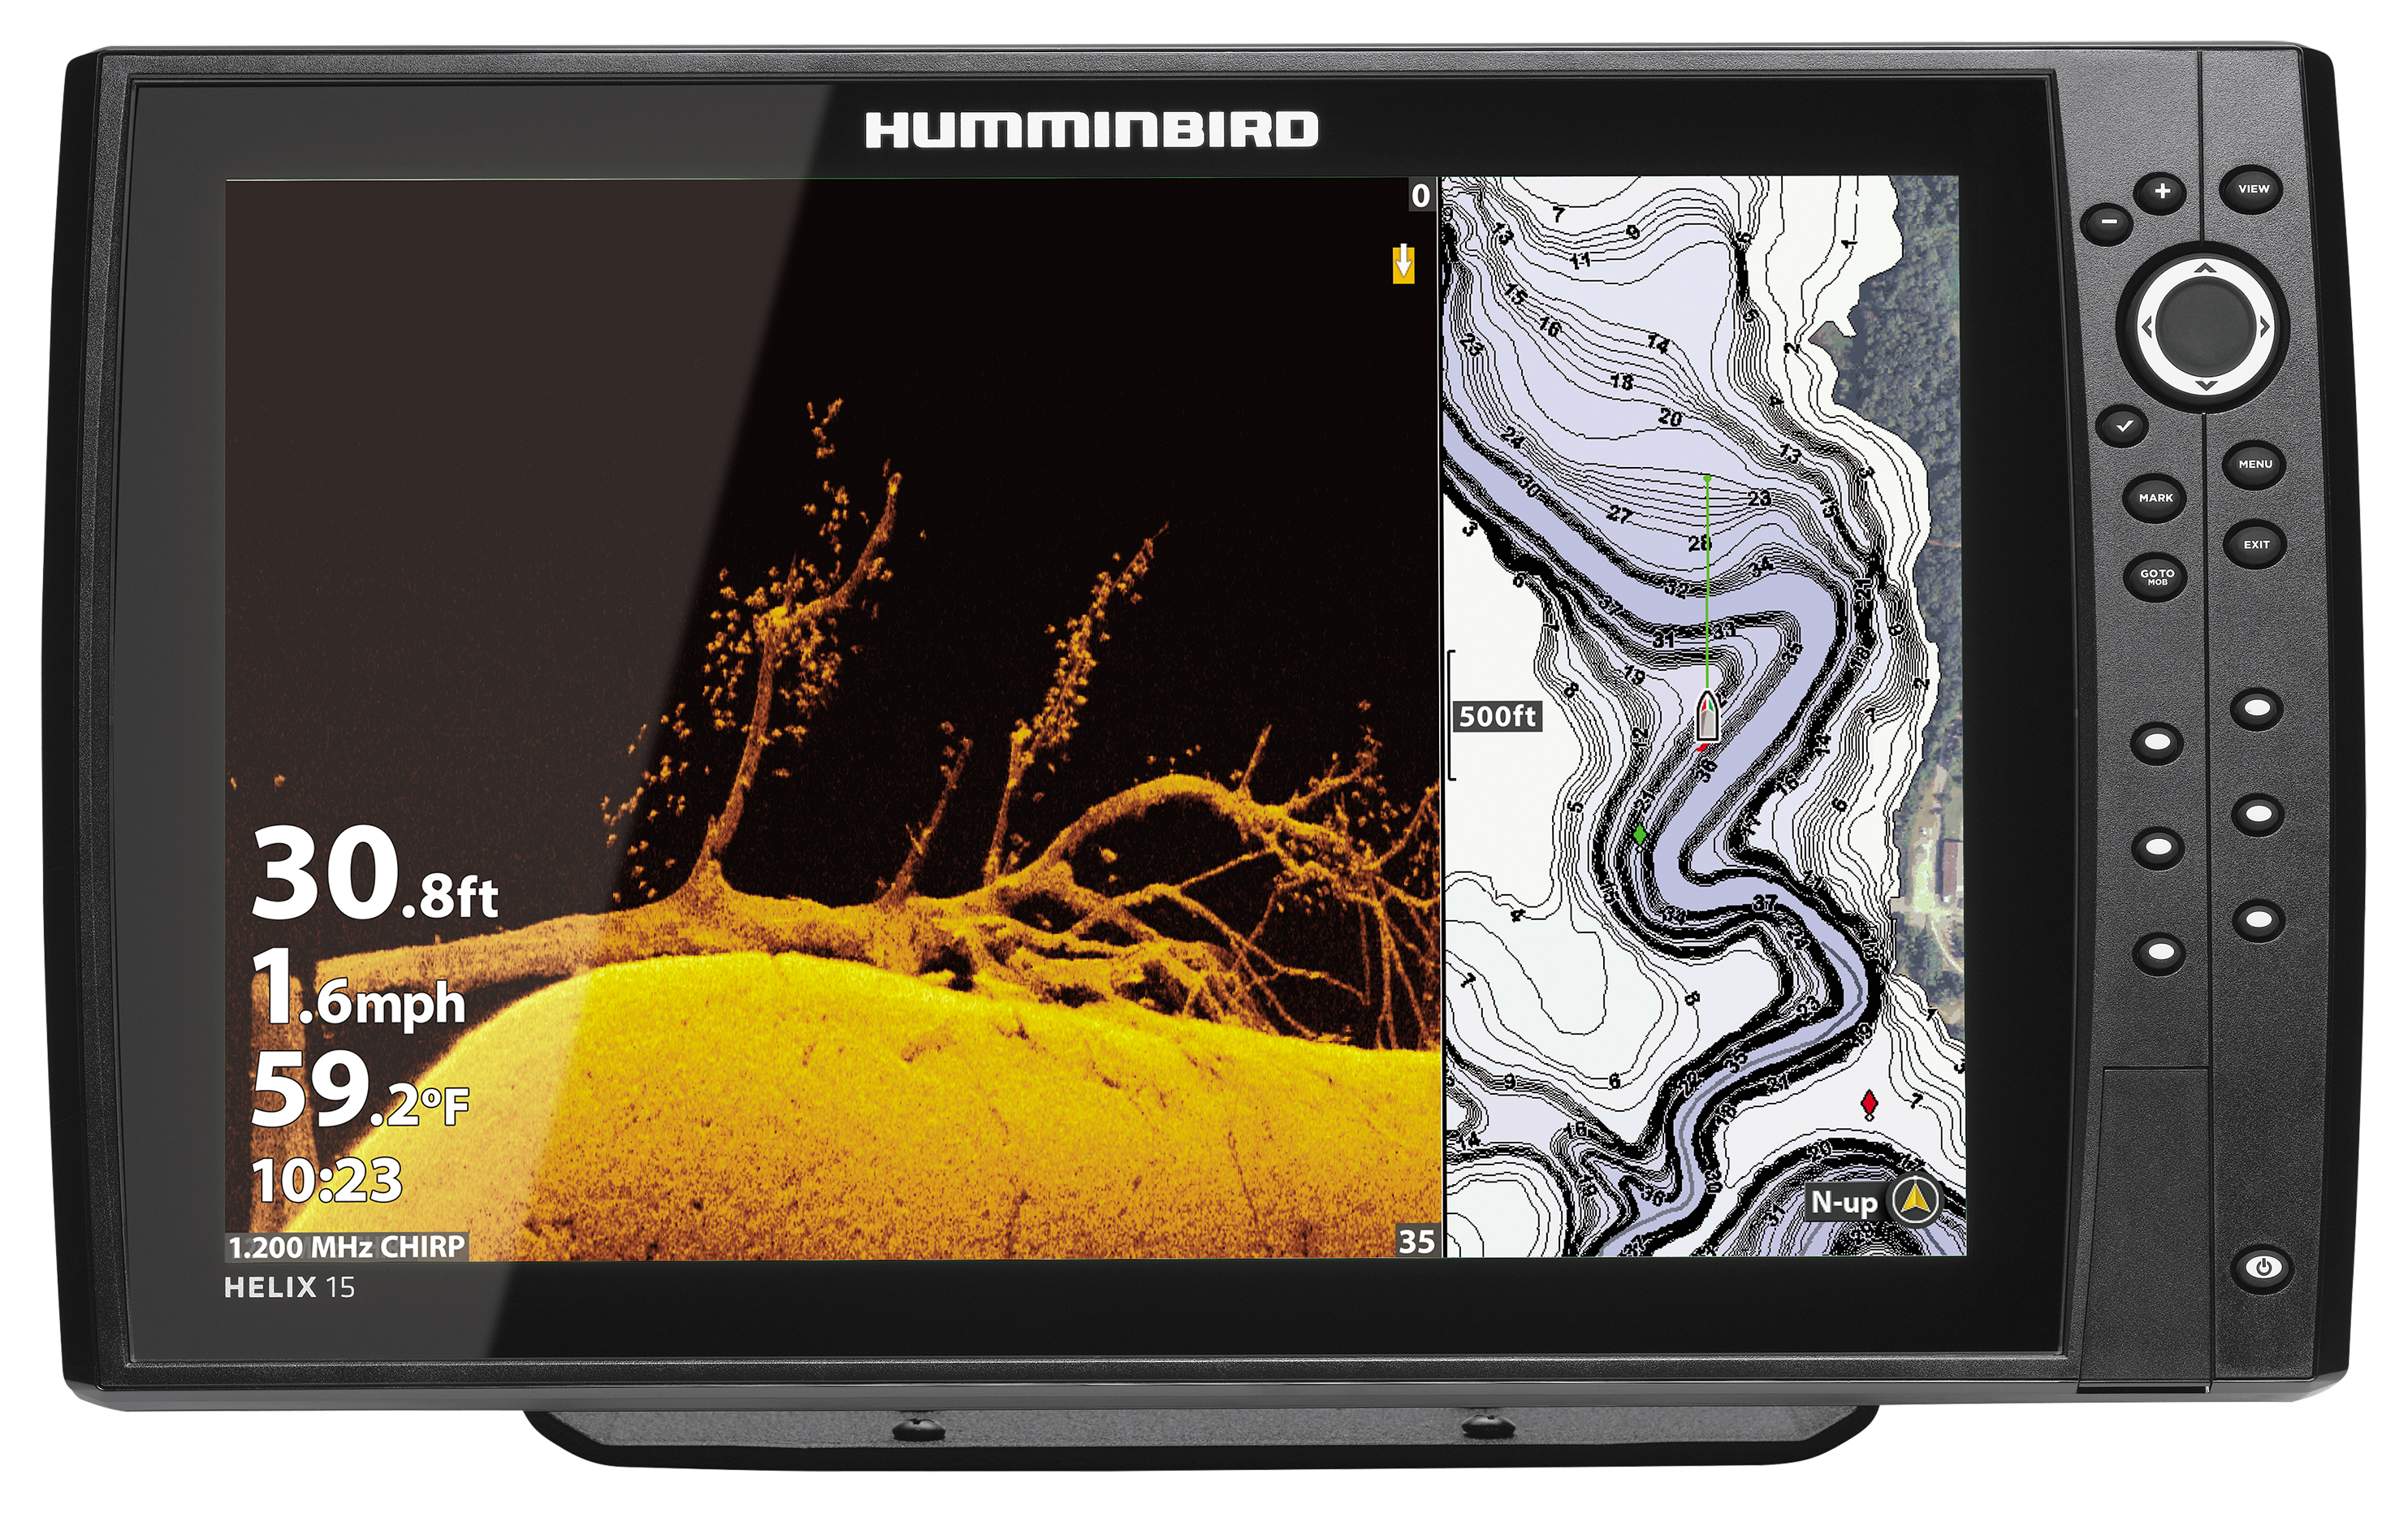 Humminbird - New Humminbird apparel is available, including the